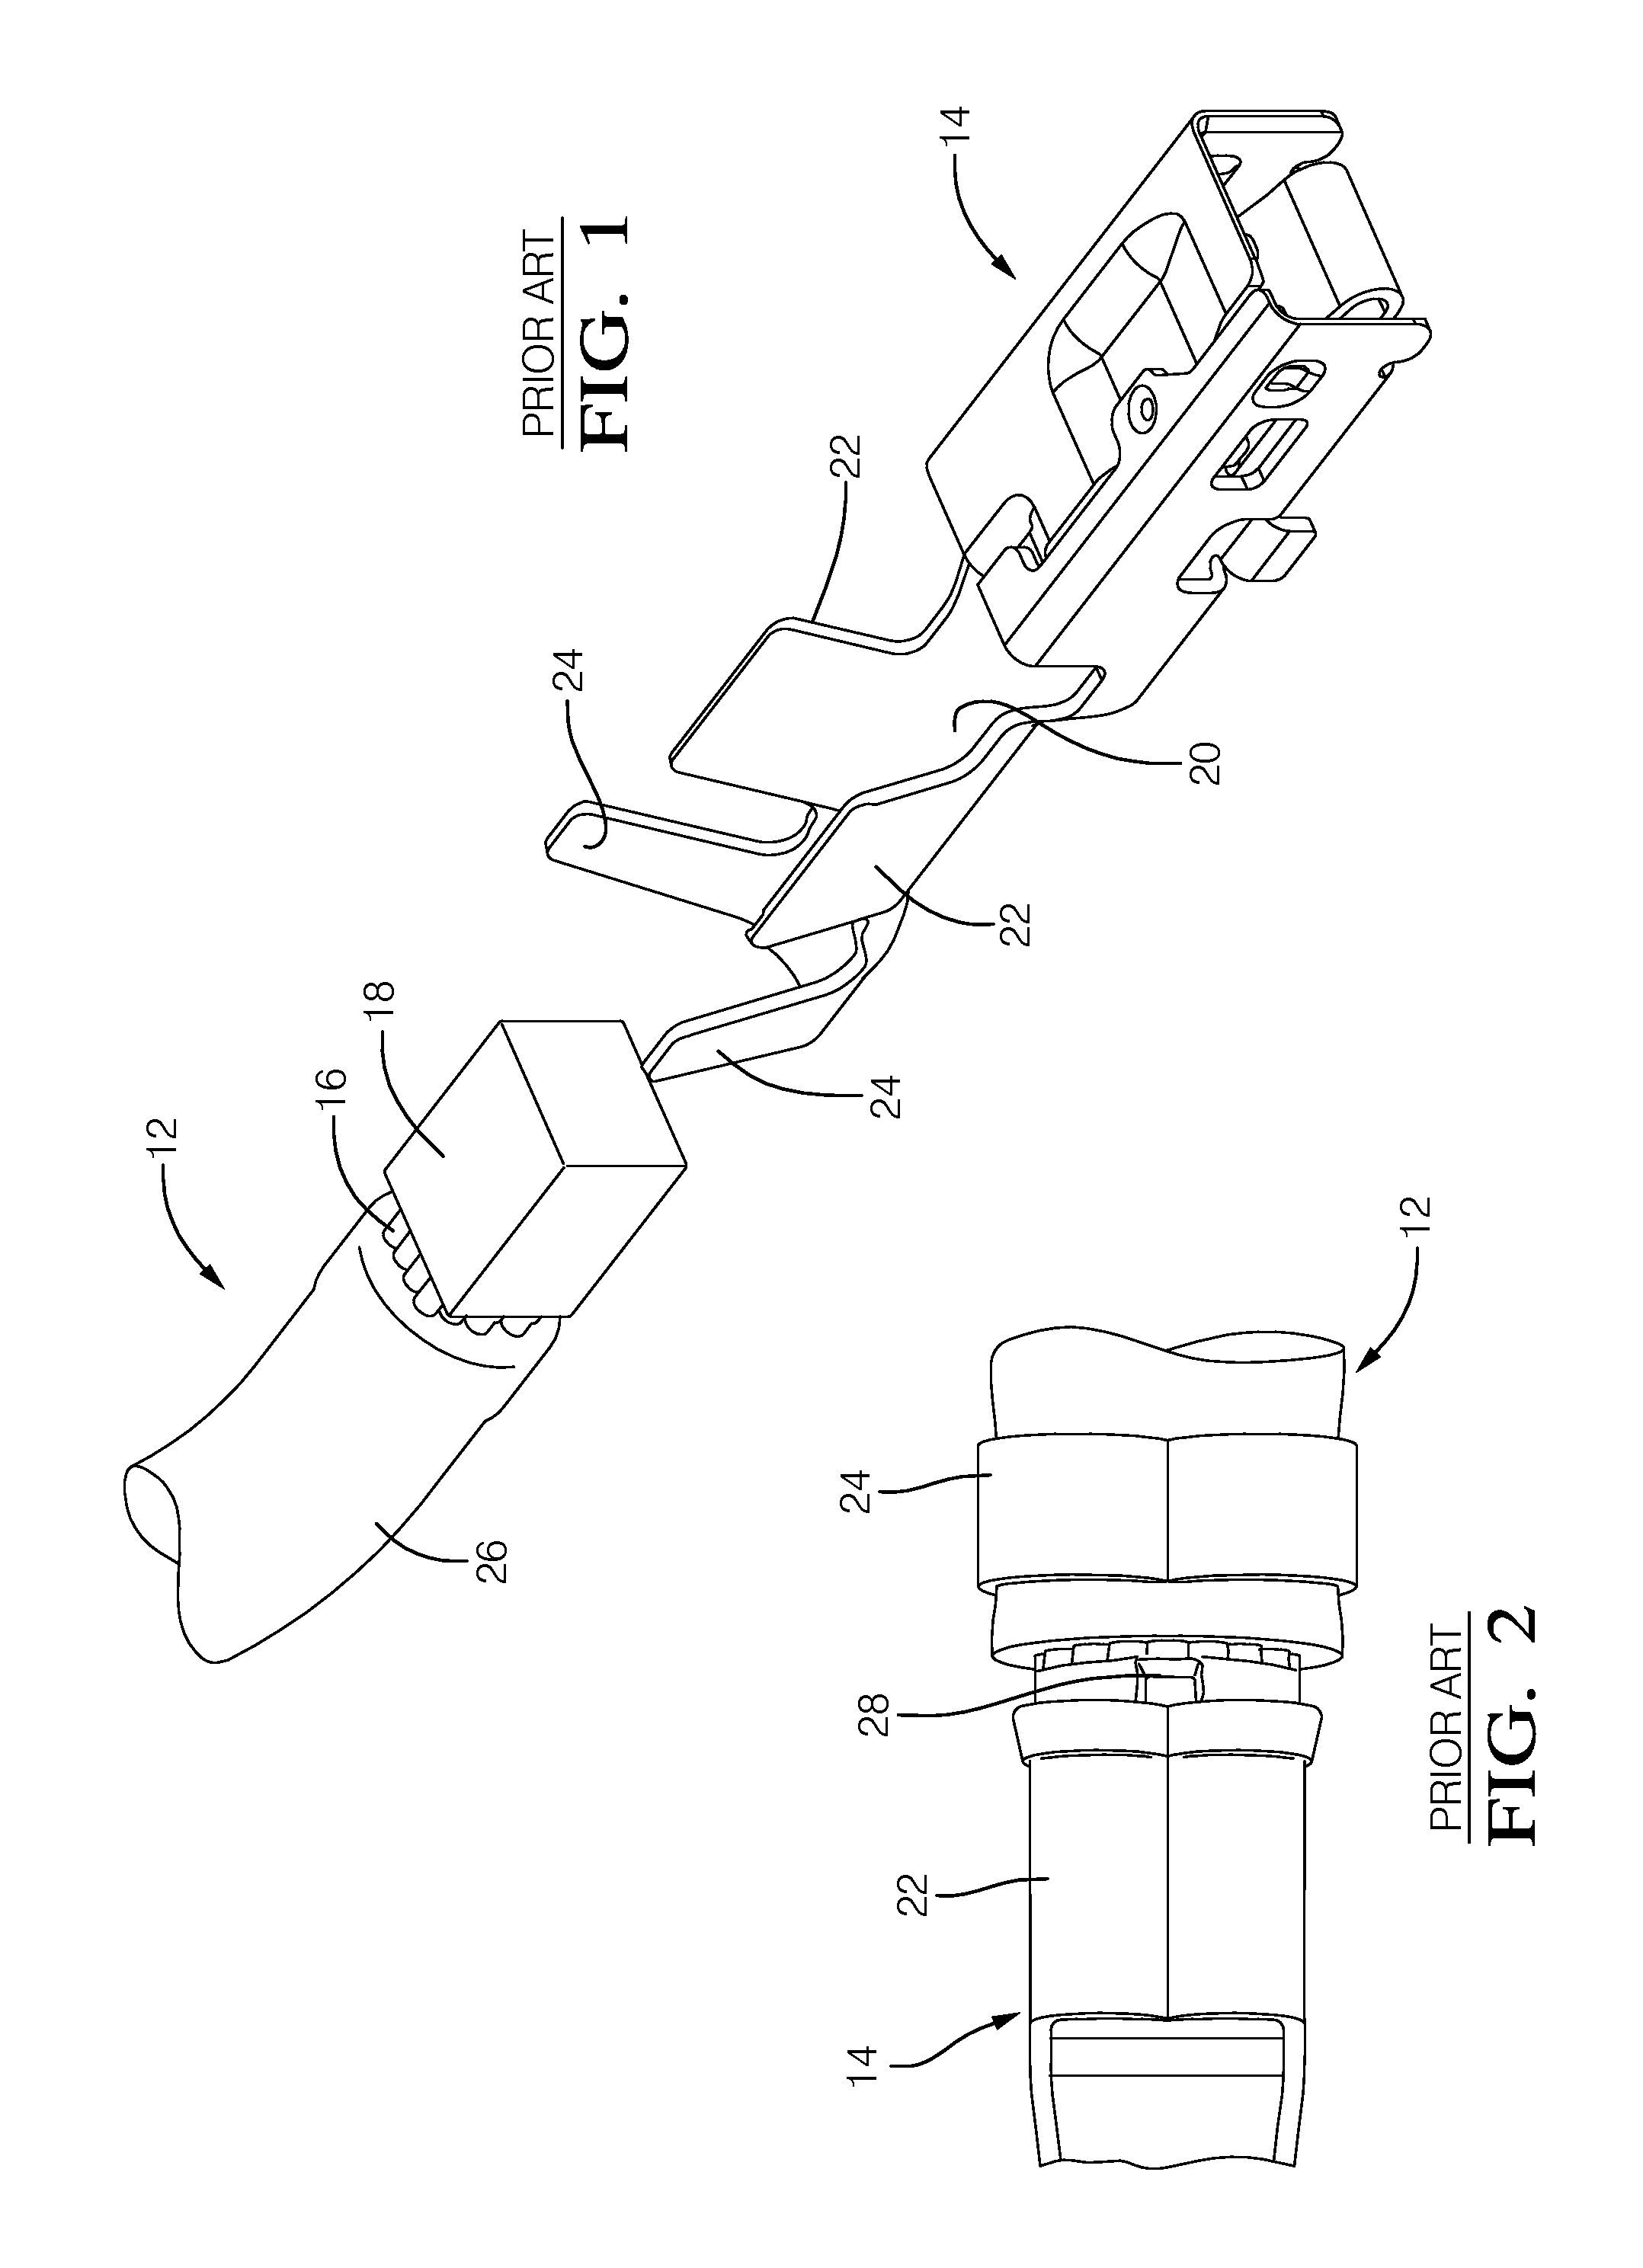 Method of attaching a wire cable terminal to a multi-strand wire cable, wire cable formed during said method, and apparatus for forming said wire cable